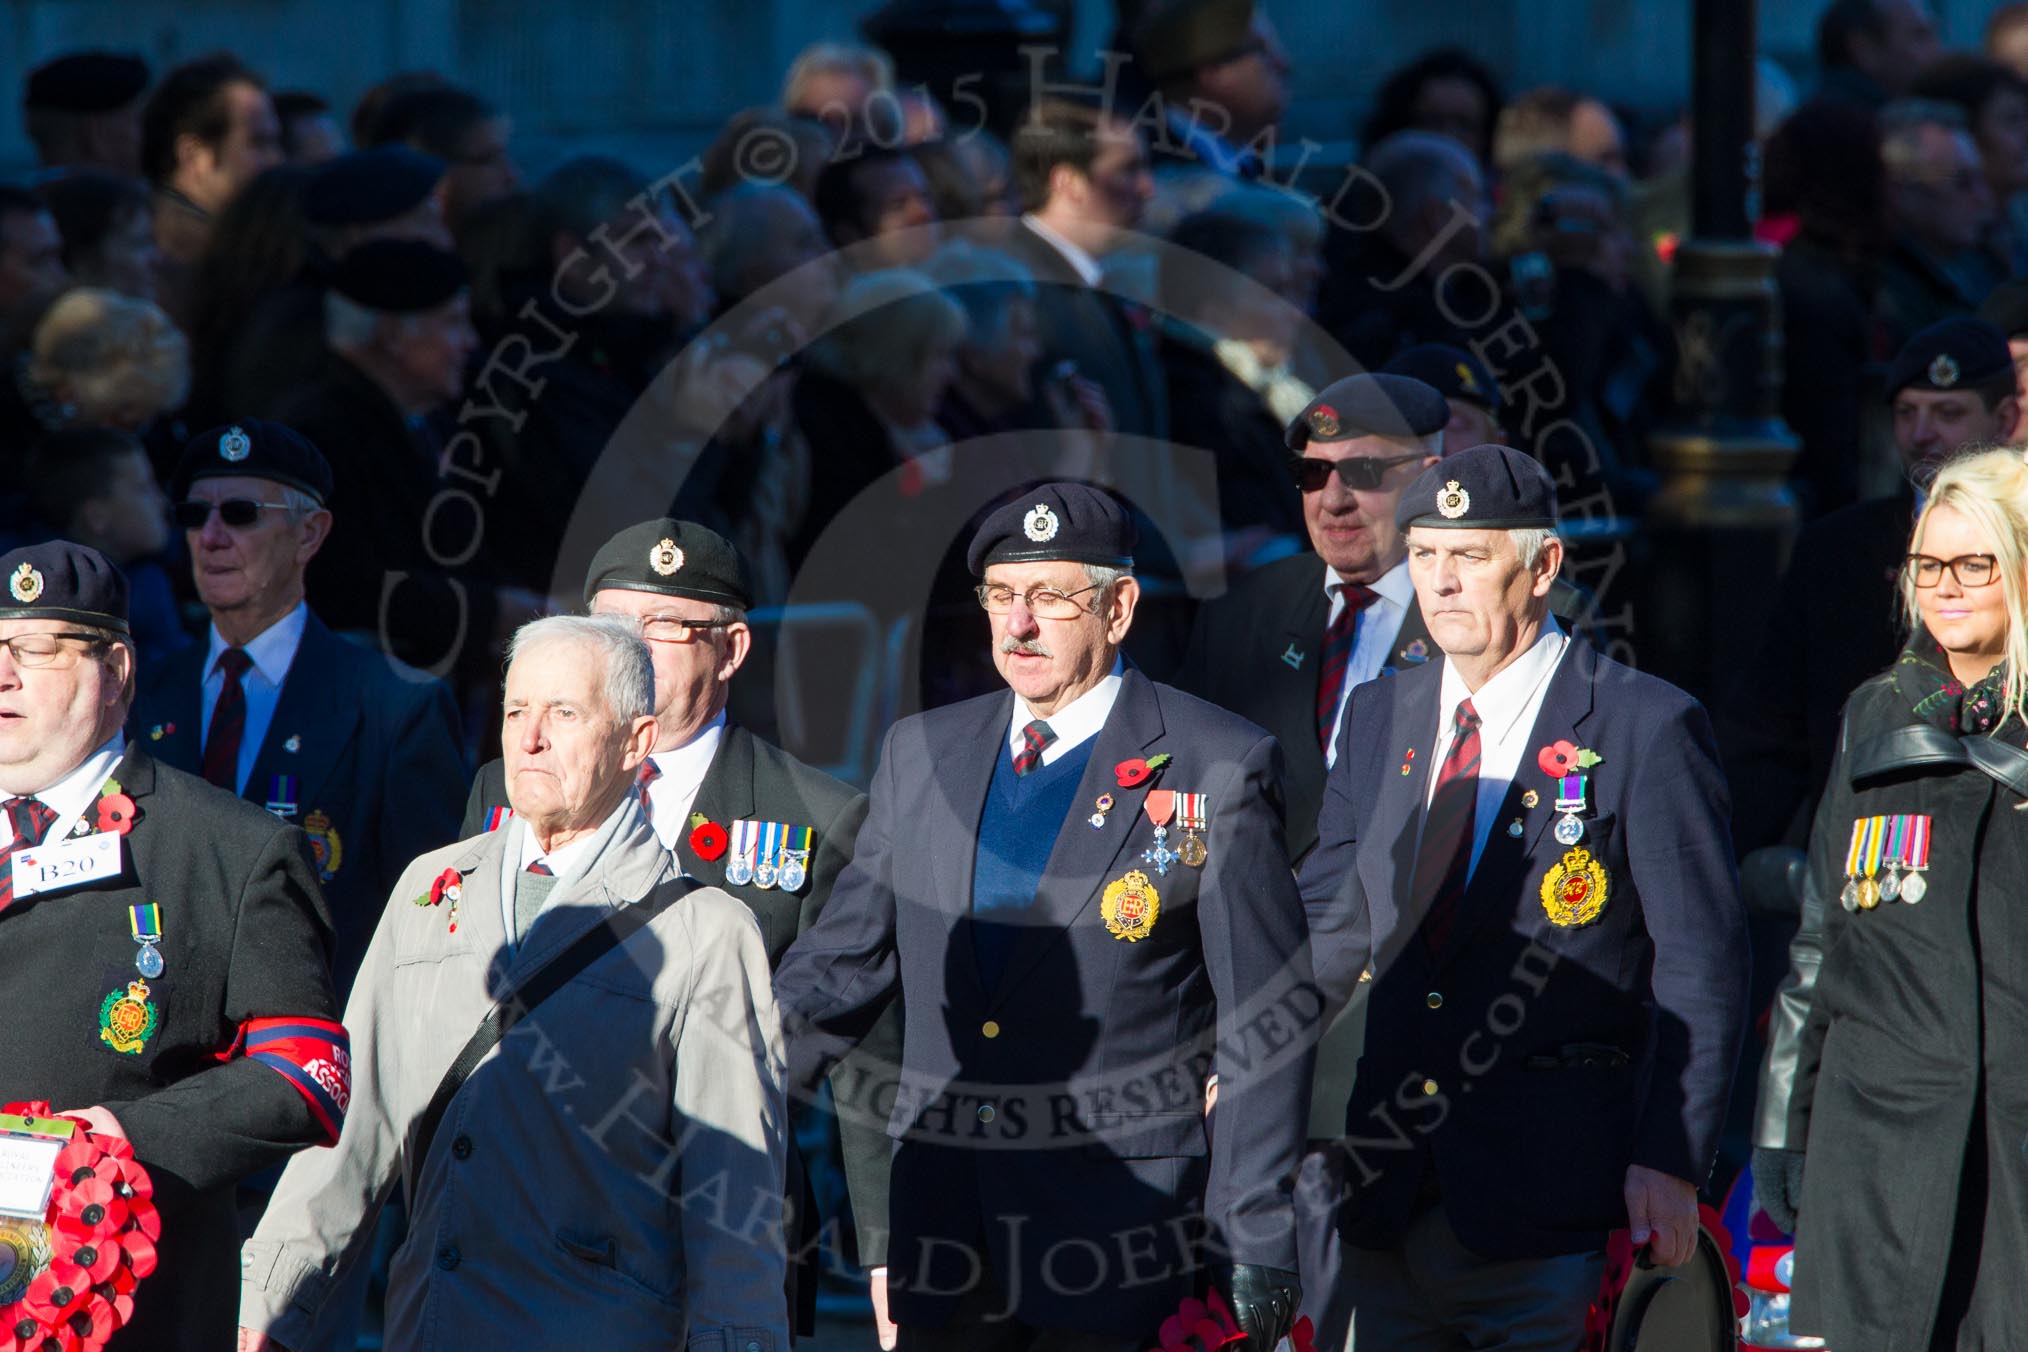 Remembrance Sunday Cenotaph March Past 2013: B20 - Royal Engineers Association..
Press stand opposite the Foreign Office building, Whitehall, London SW1,
London,
Greater London,
United Kingdom,
on 10 November 2013 at 12:01, image #1460